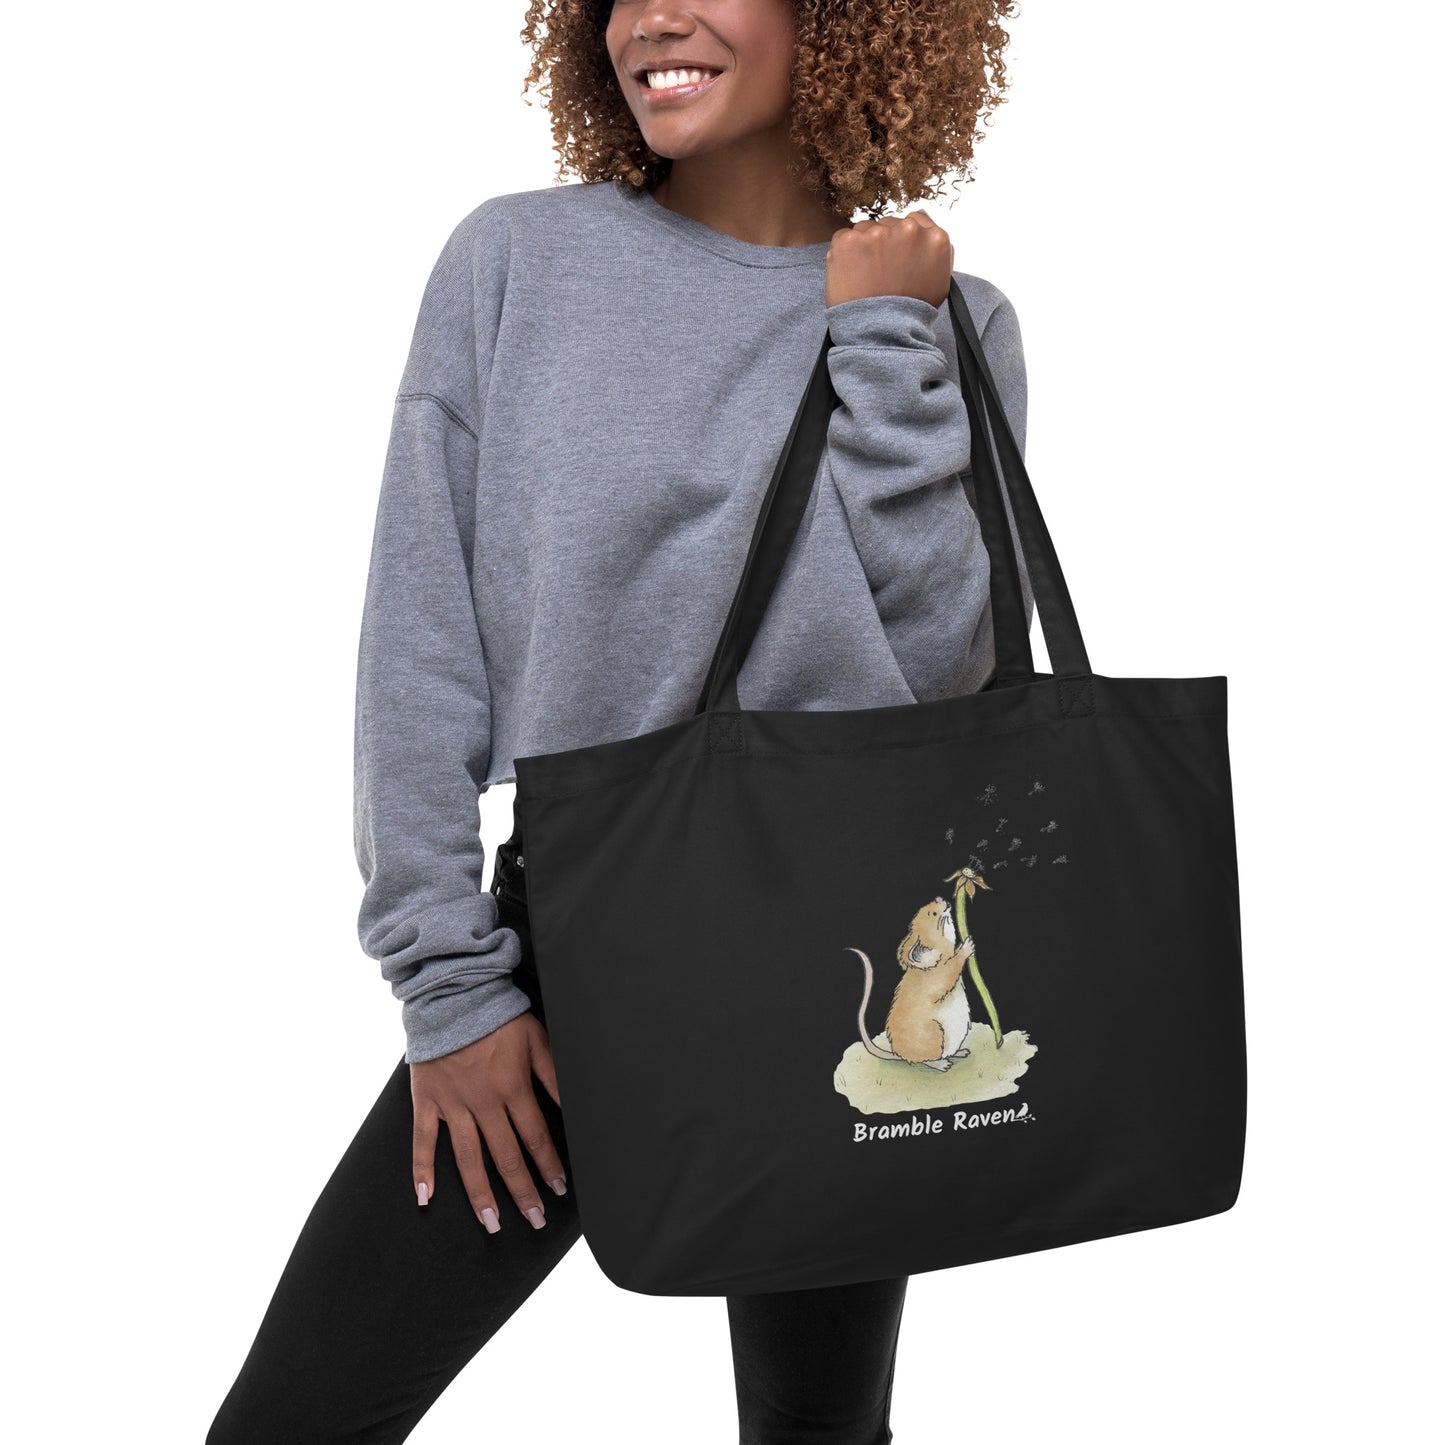 Original watercolor Dandelion wish design of a cute mouse blowing dandelion seeds. Printed on large black colored eco tote. 20 by 14 by 5 inches. Shown being held by female model.